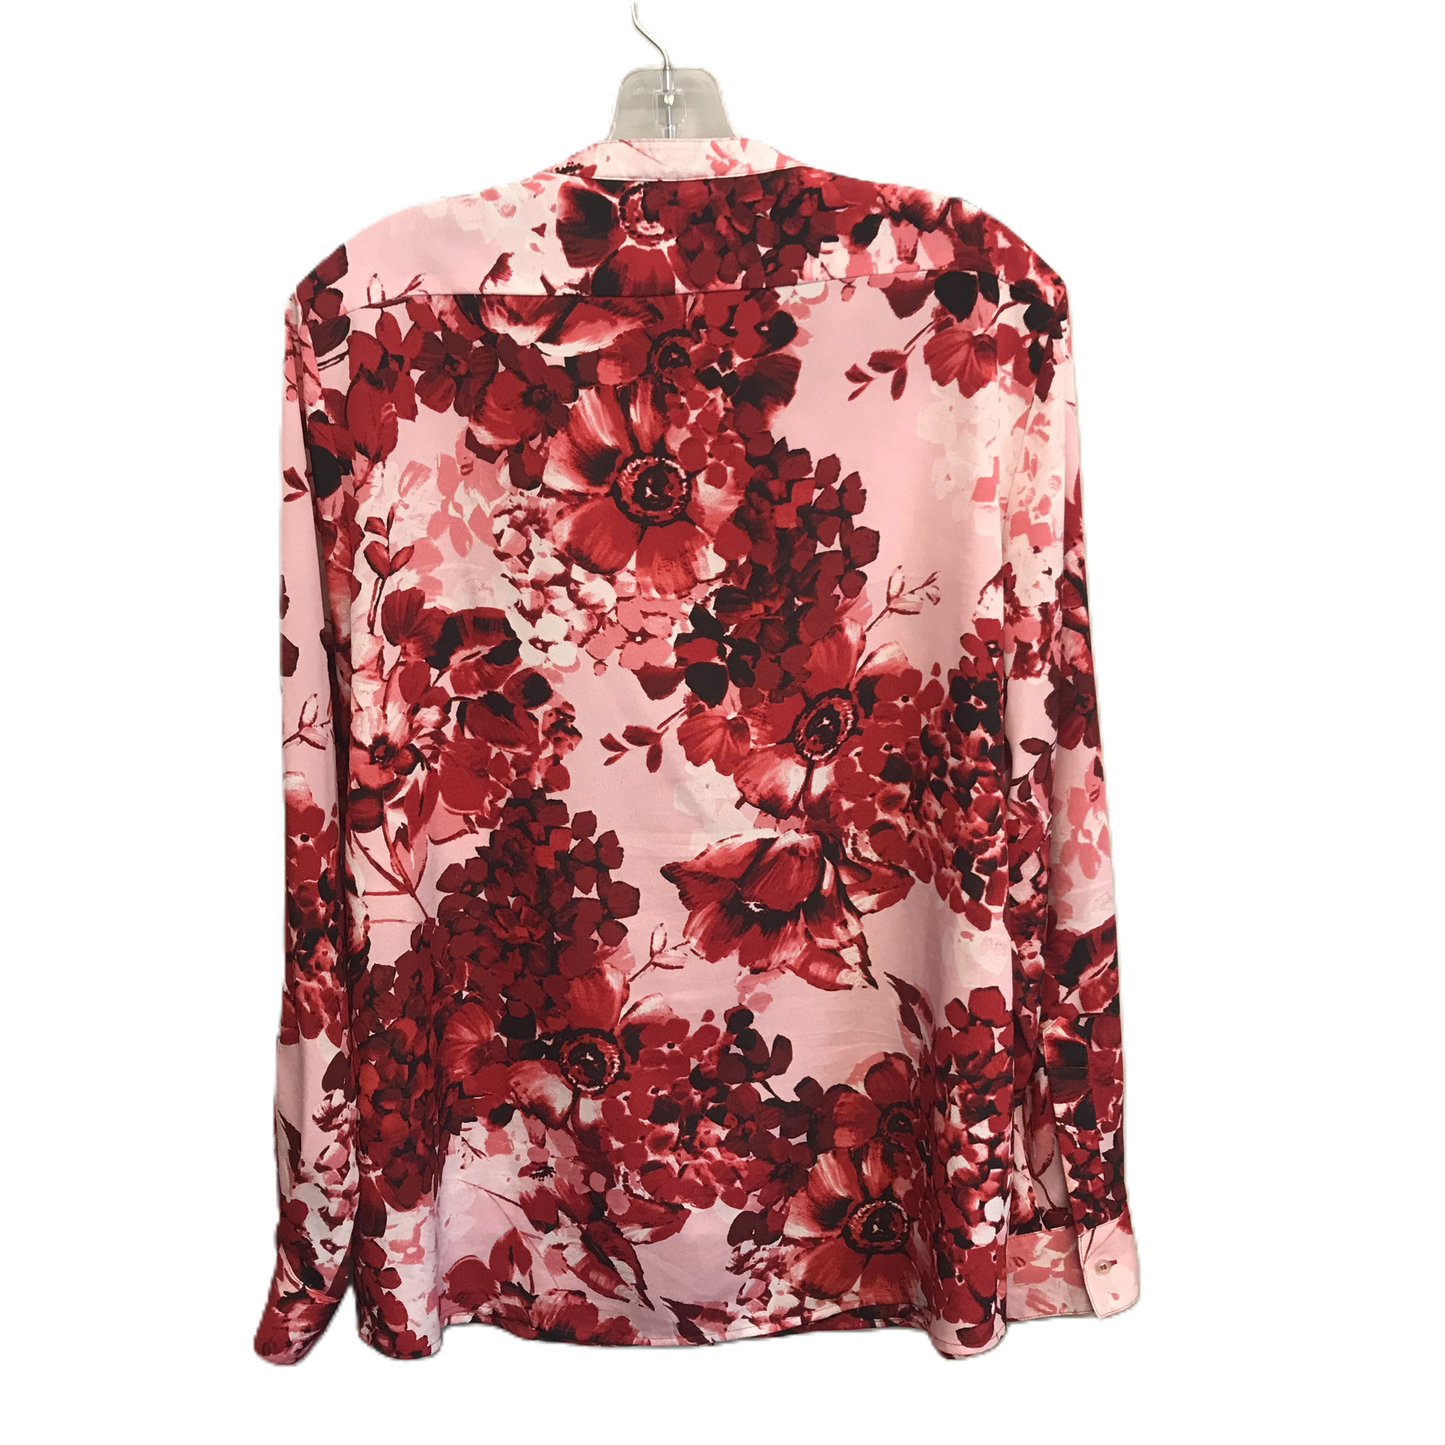 Floral Print Top Long Sleeve By Calvin Klein, Size: Xl